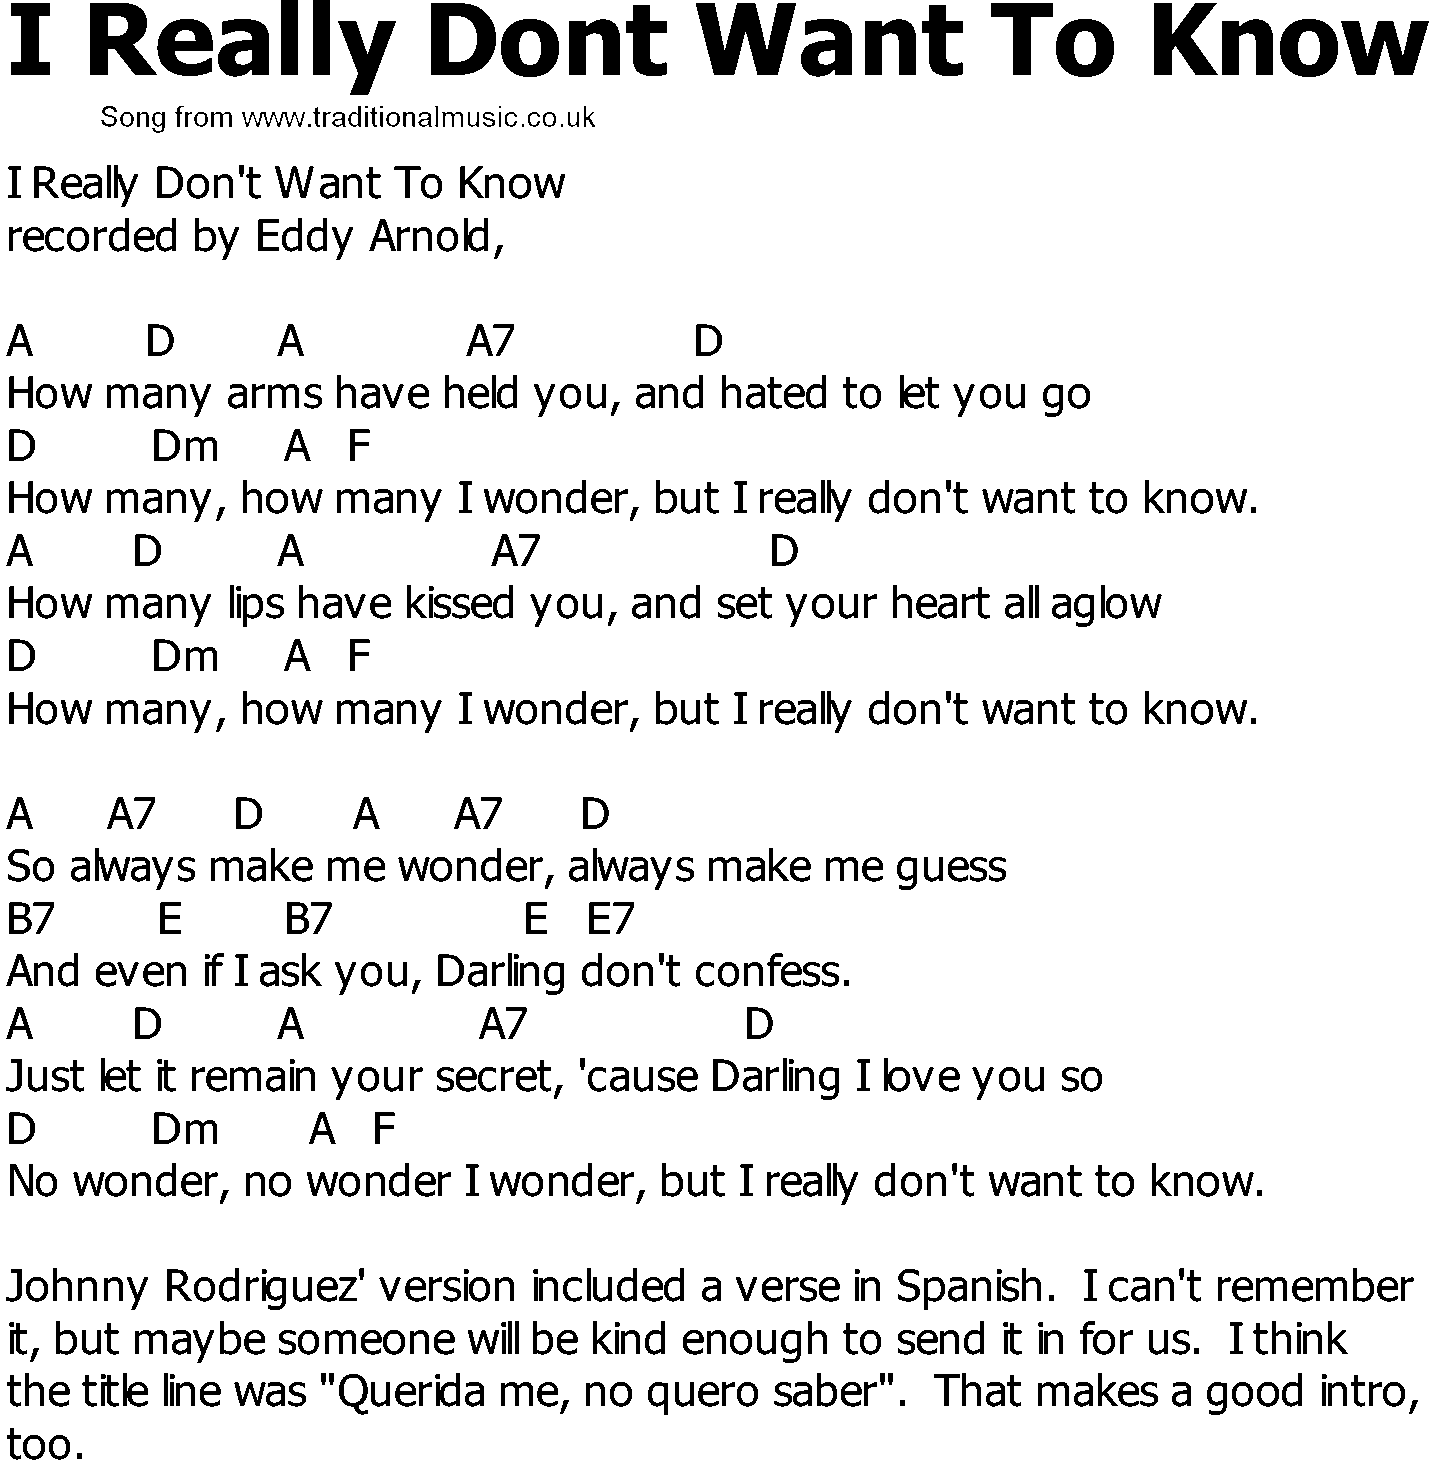 Old Country song lyrics with chords - I Really Dont Want To Know